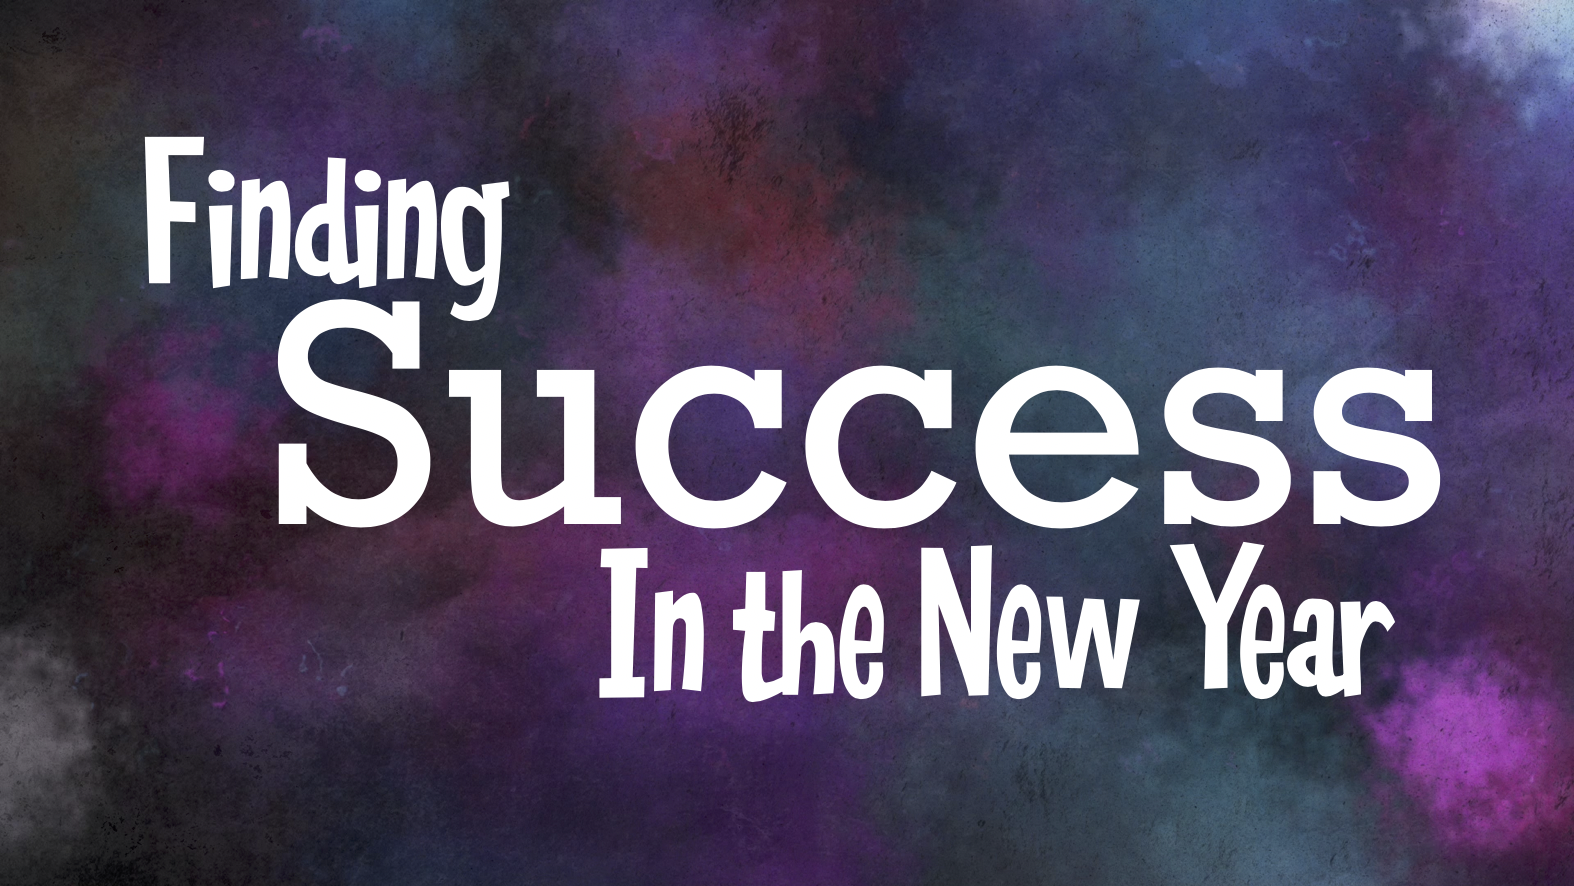 Finding Success in the New Year message series logo